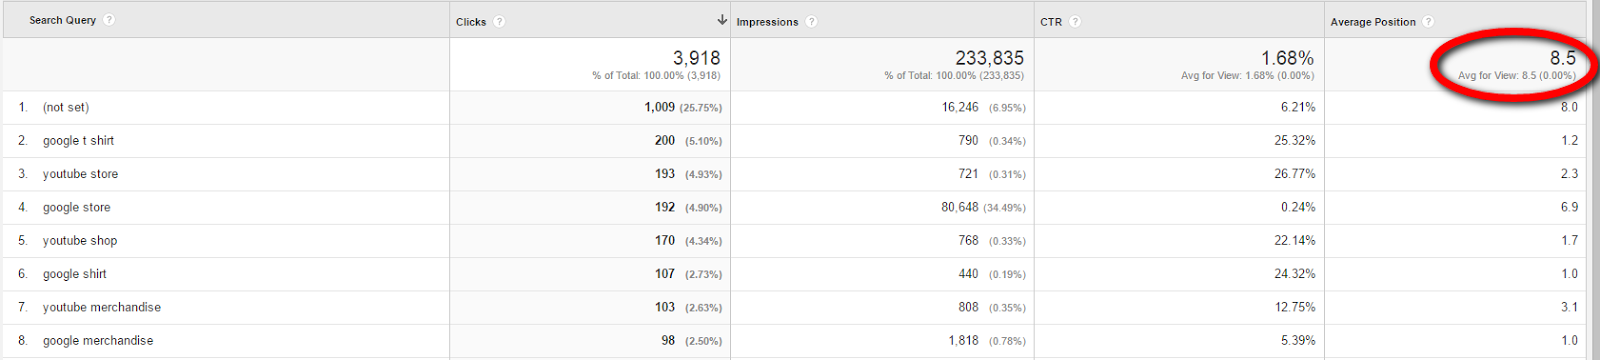 Watch the average position metric to predict whether you will gain more impressions and clicks.